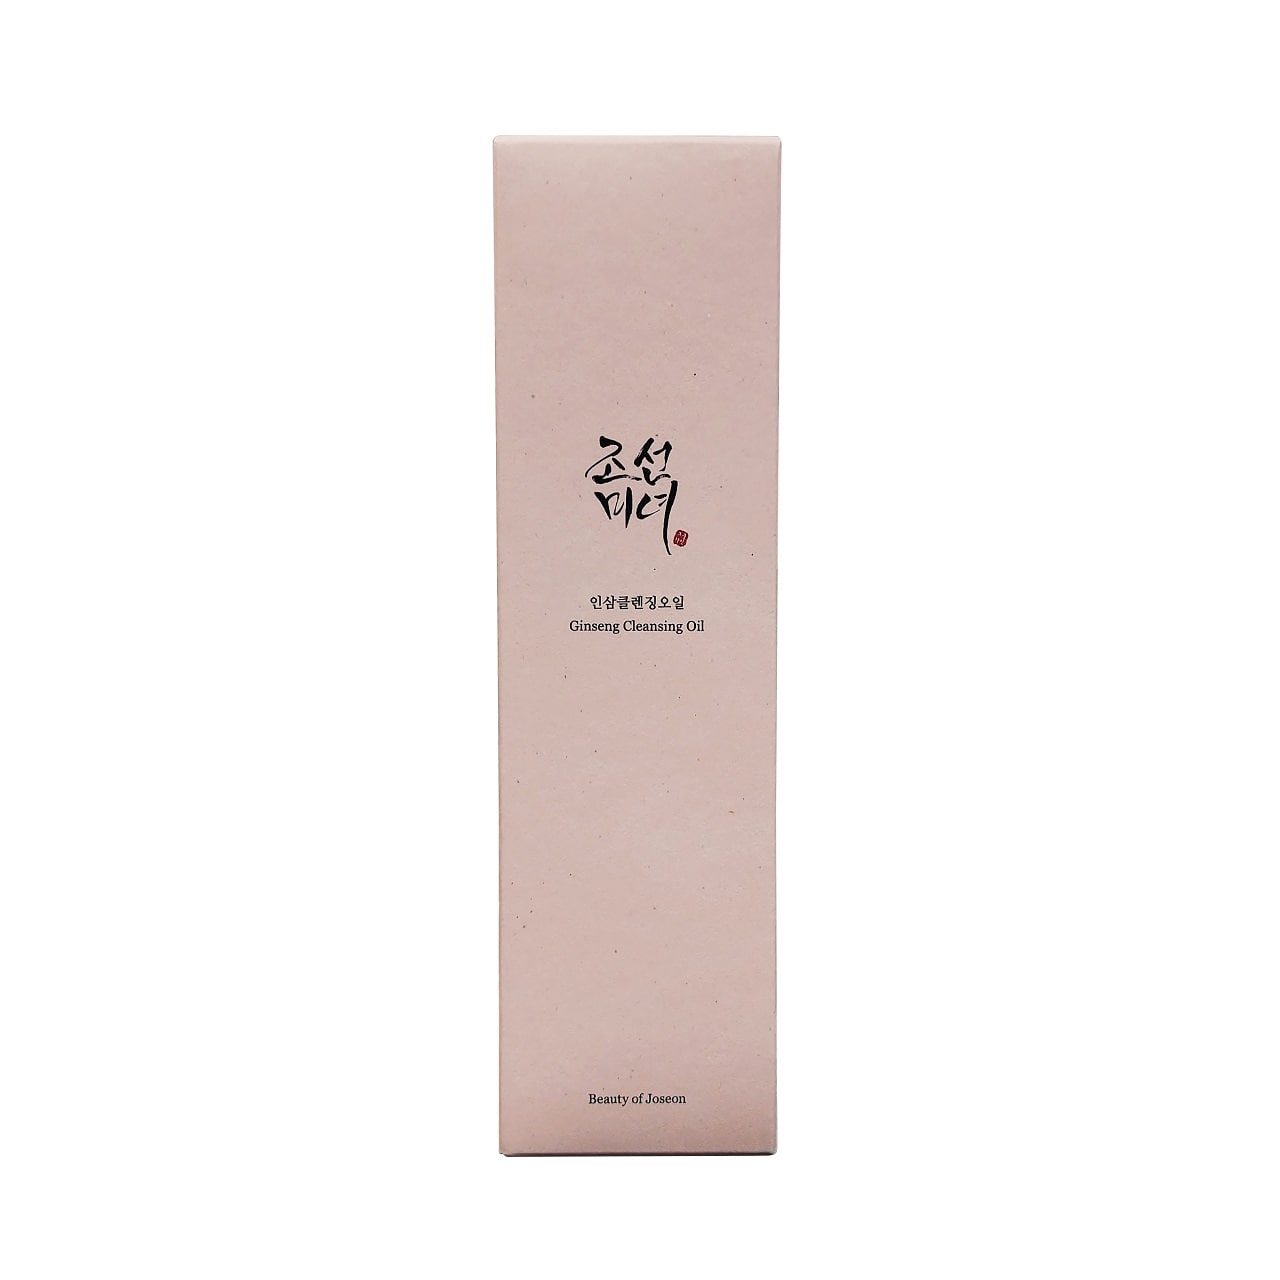 Product label for Beauty of Joseon Ginseng Cleansing Oil (210 mL)